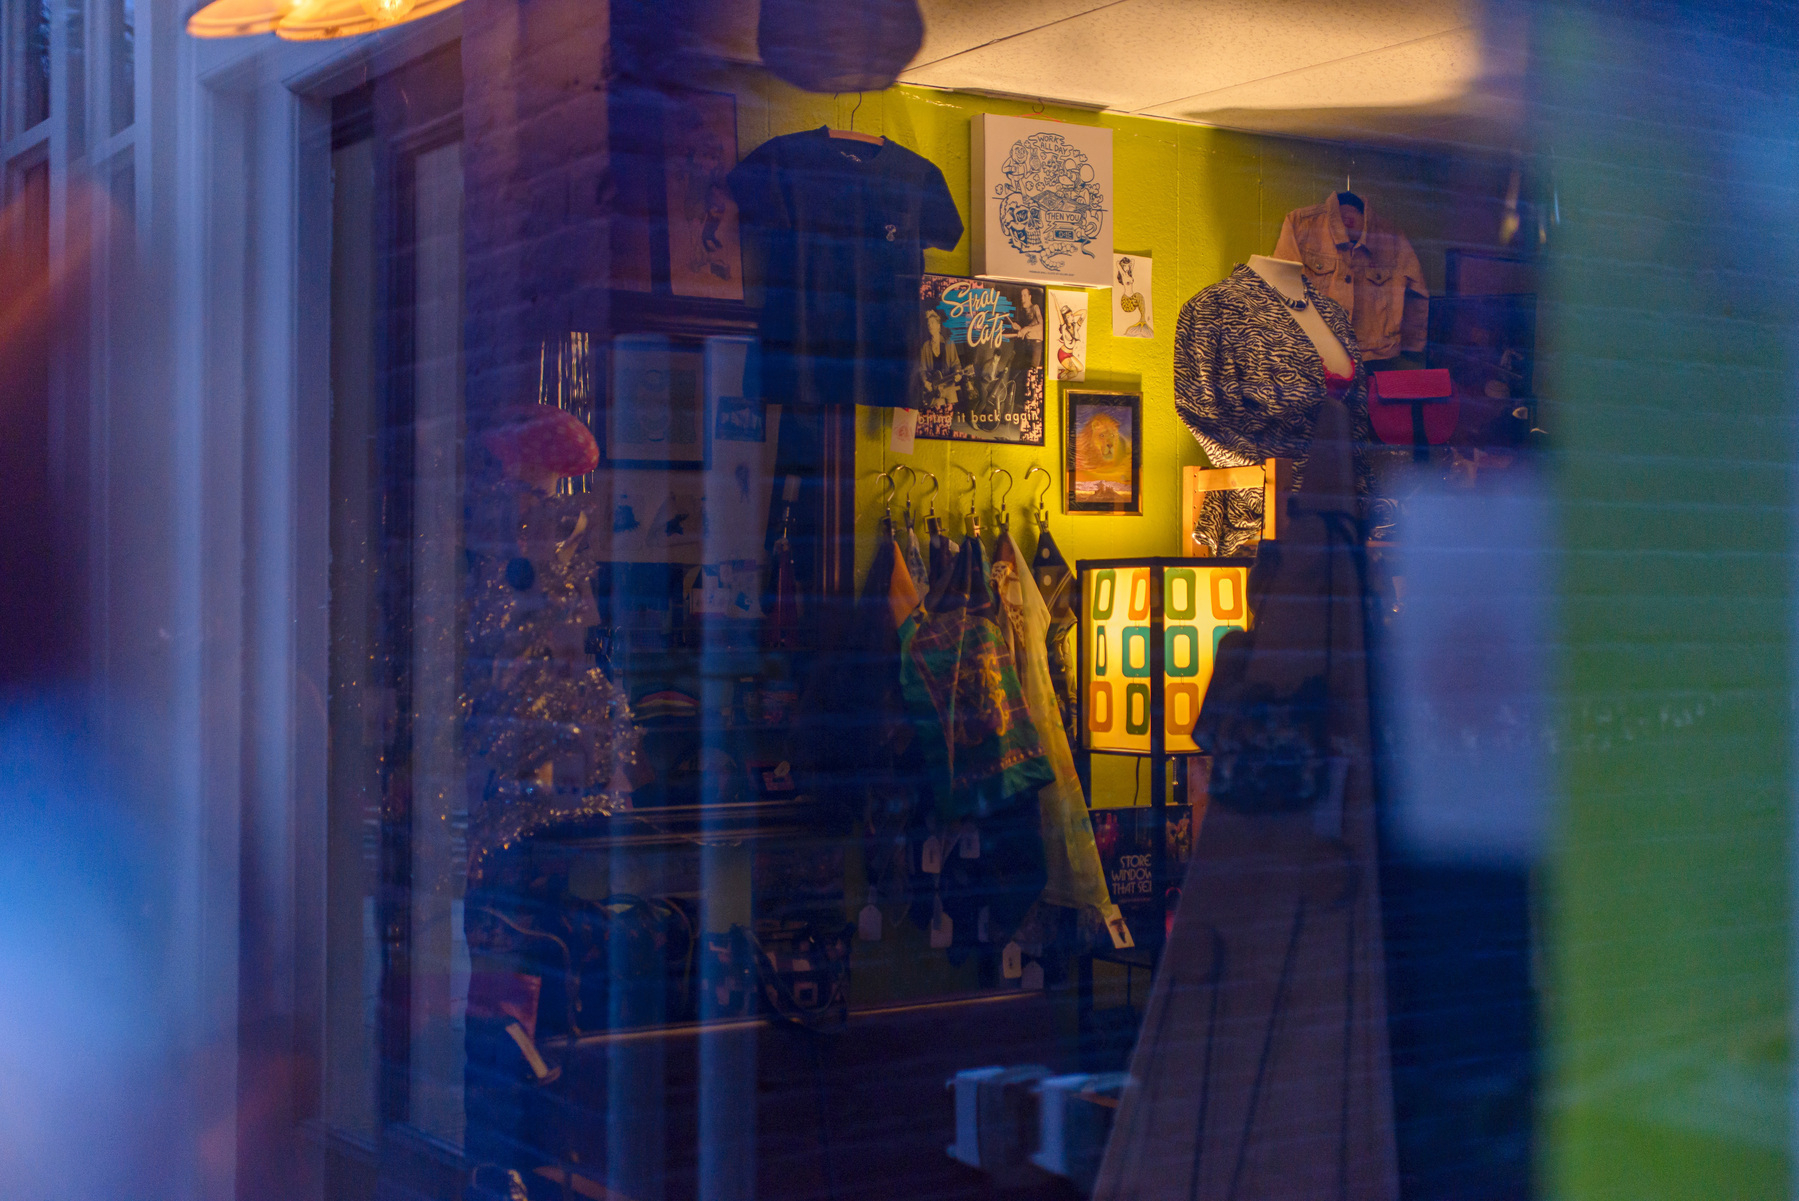 Interior of vintage clothing store with soft glow of table lamp illuminating vintage items and a soft blue light reflected off the window at the left and right edges.